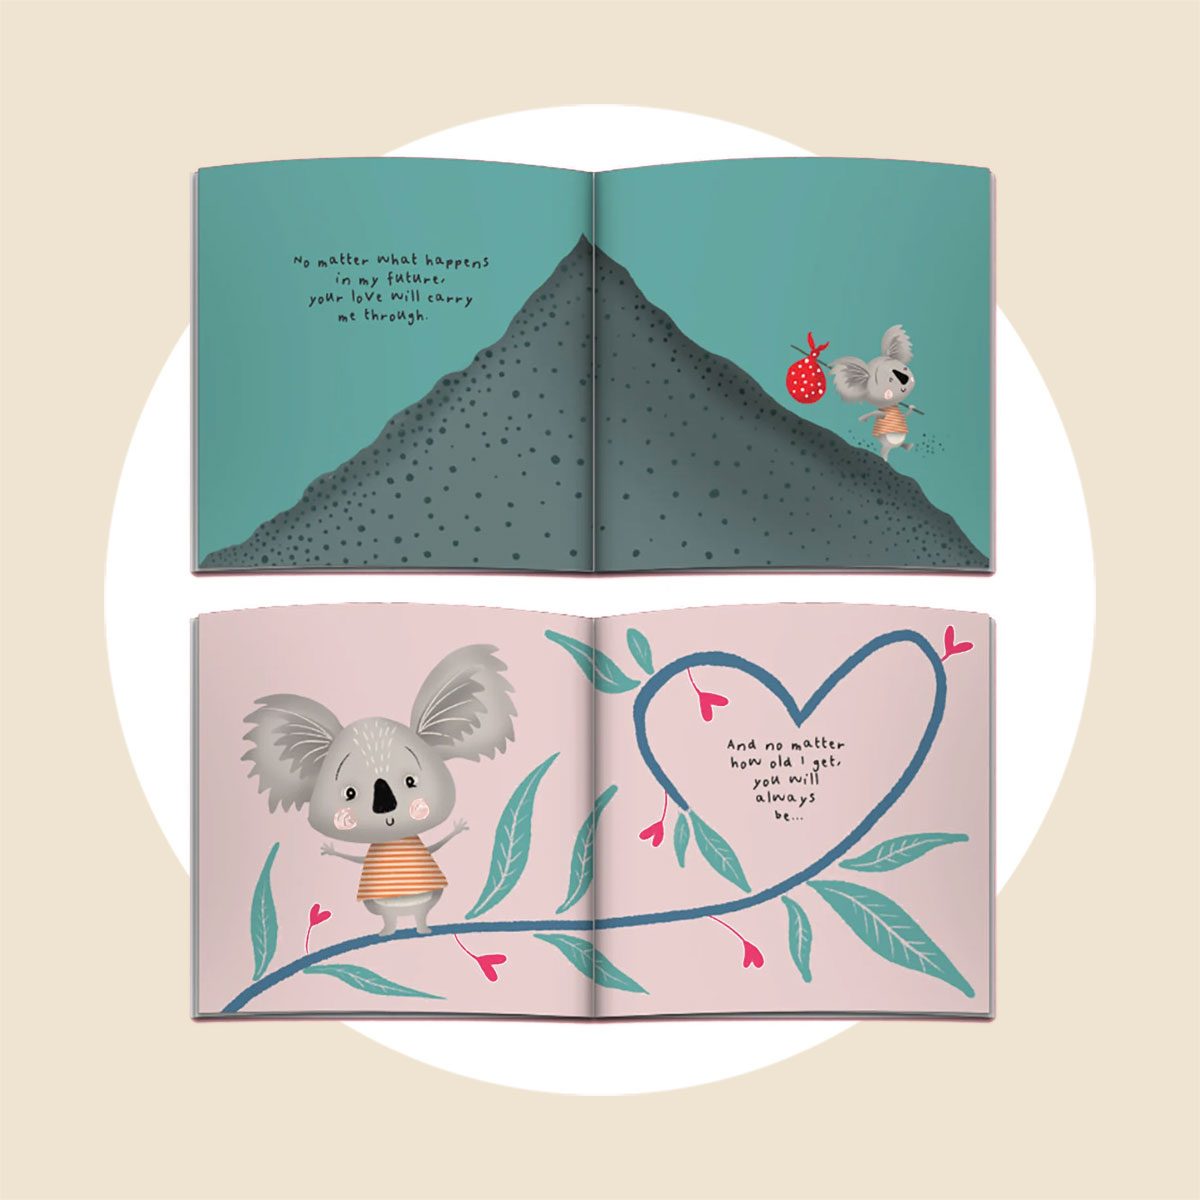 Toh Ecomm Personalized Valentine Book Via Fromlucyandco Follow Etsy.com